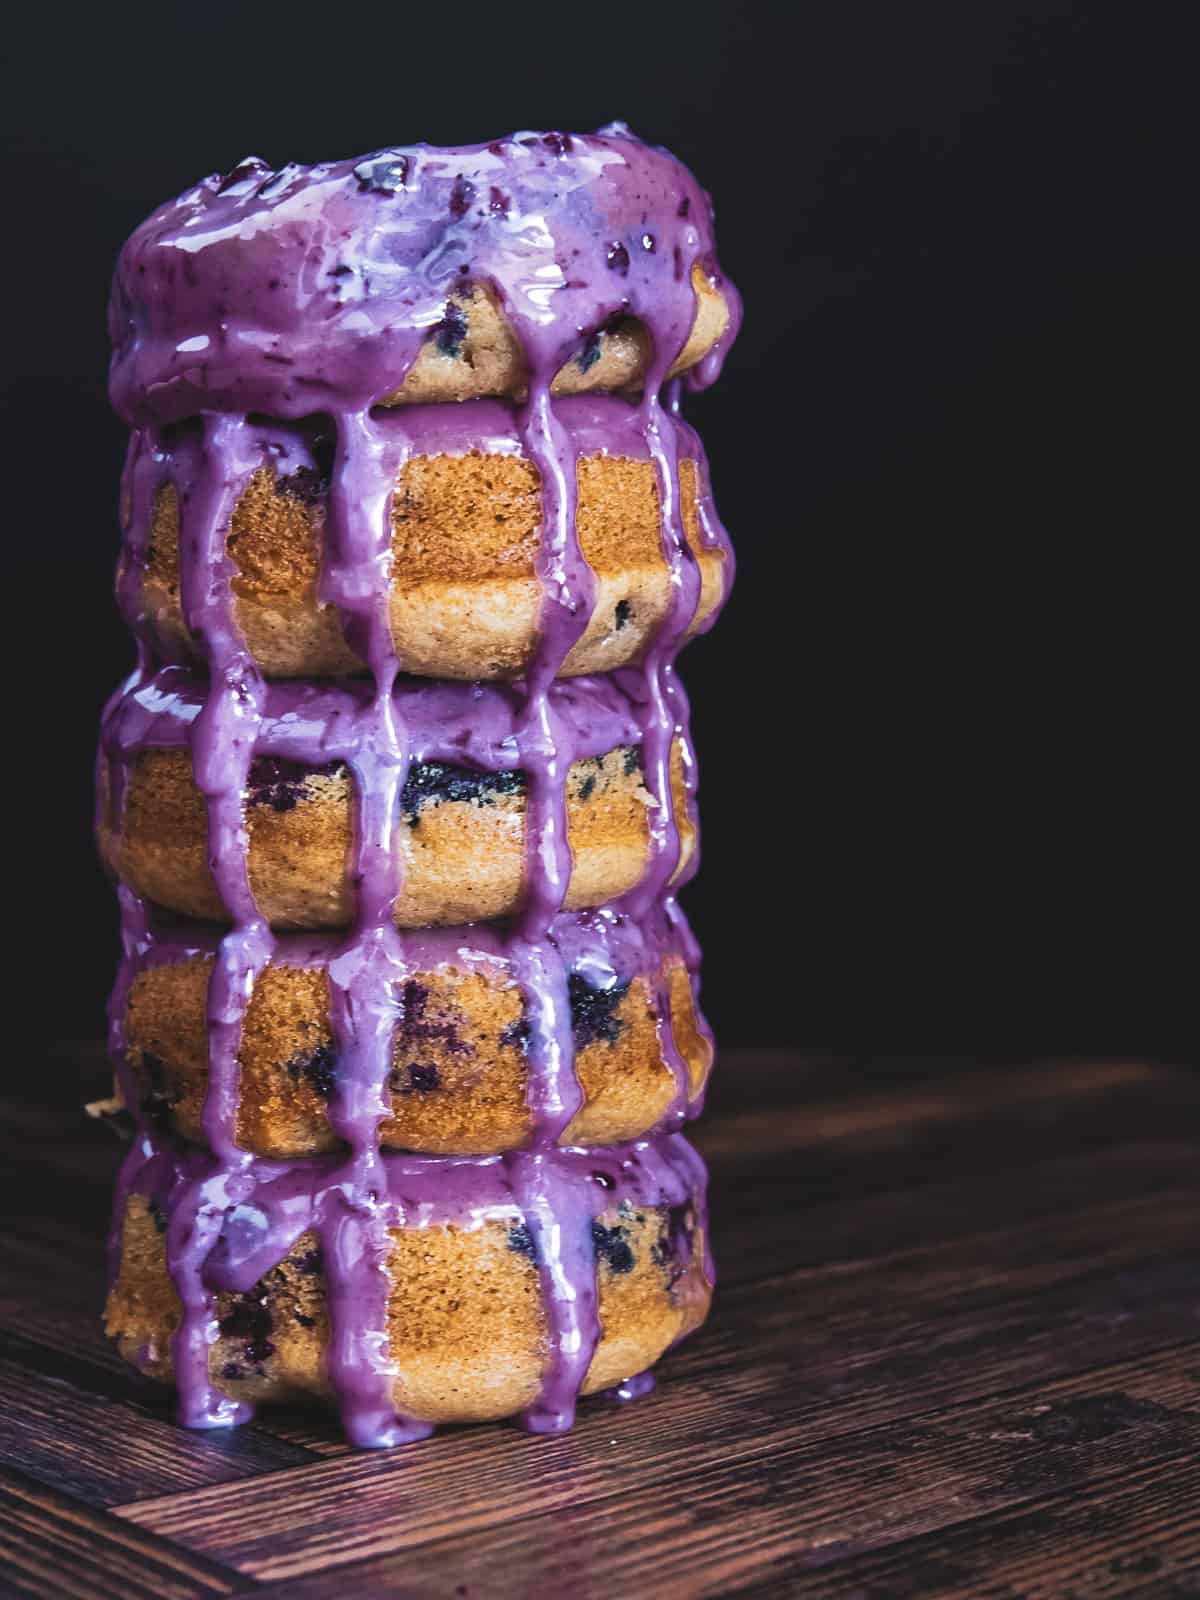 A stack of 5 baked blueberry donuts with blueberry glaze pouring over them.